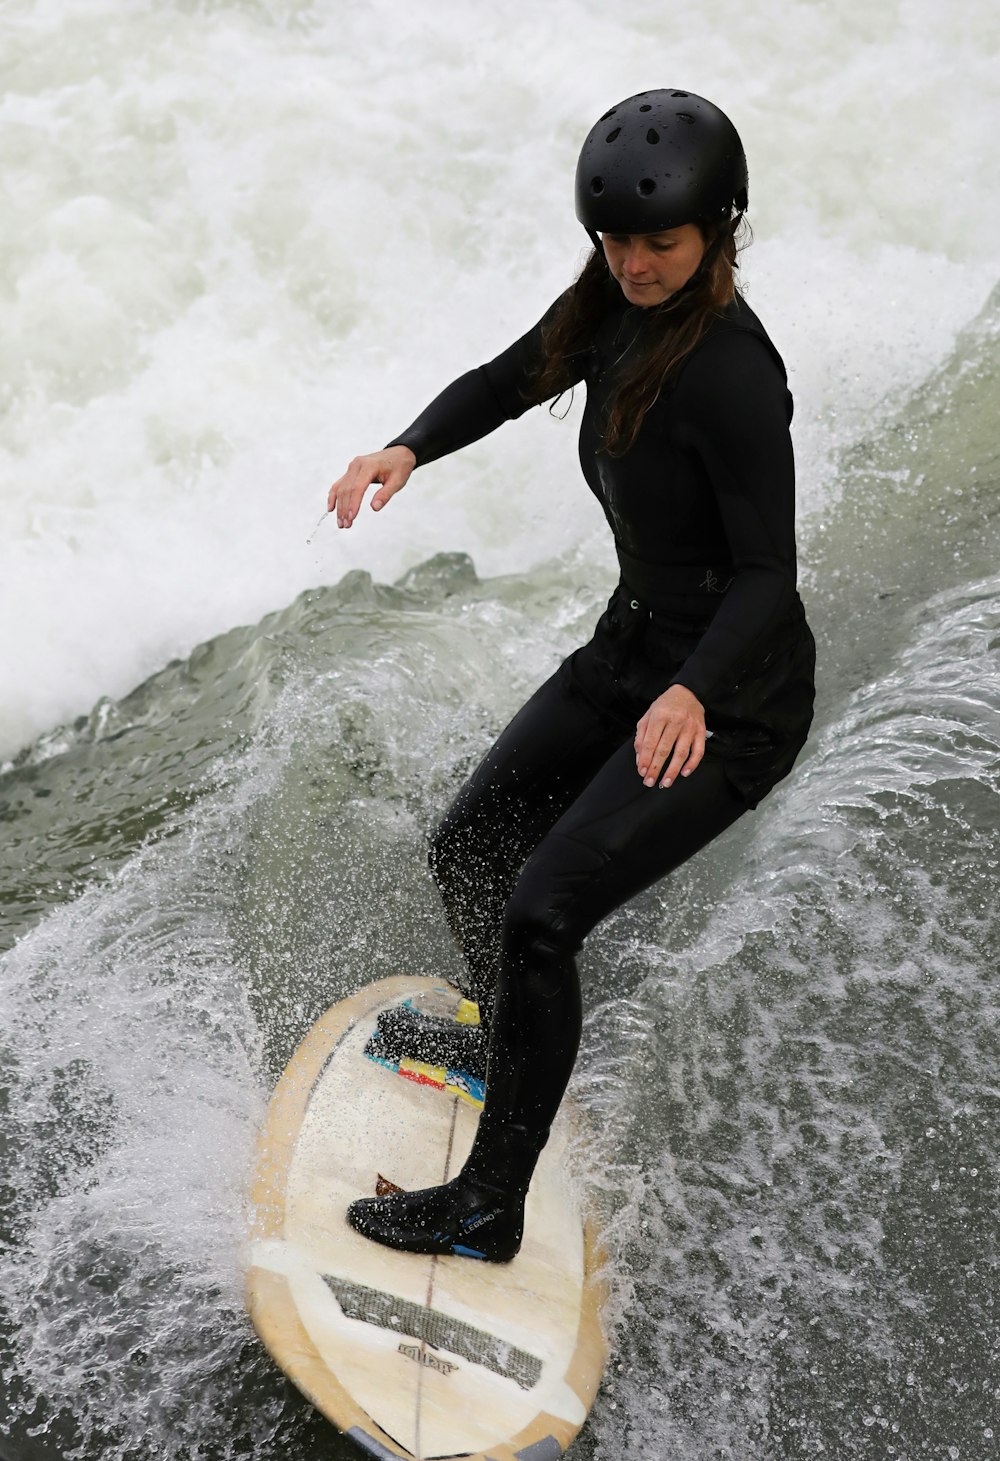 woman in black long sleeve shirt and black pants surfing on water during daytime